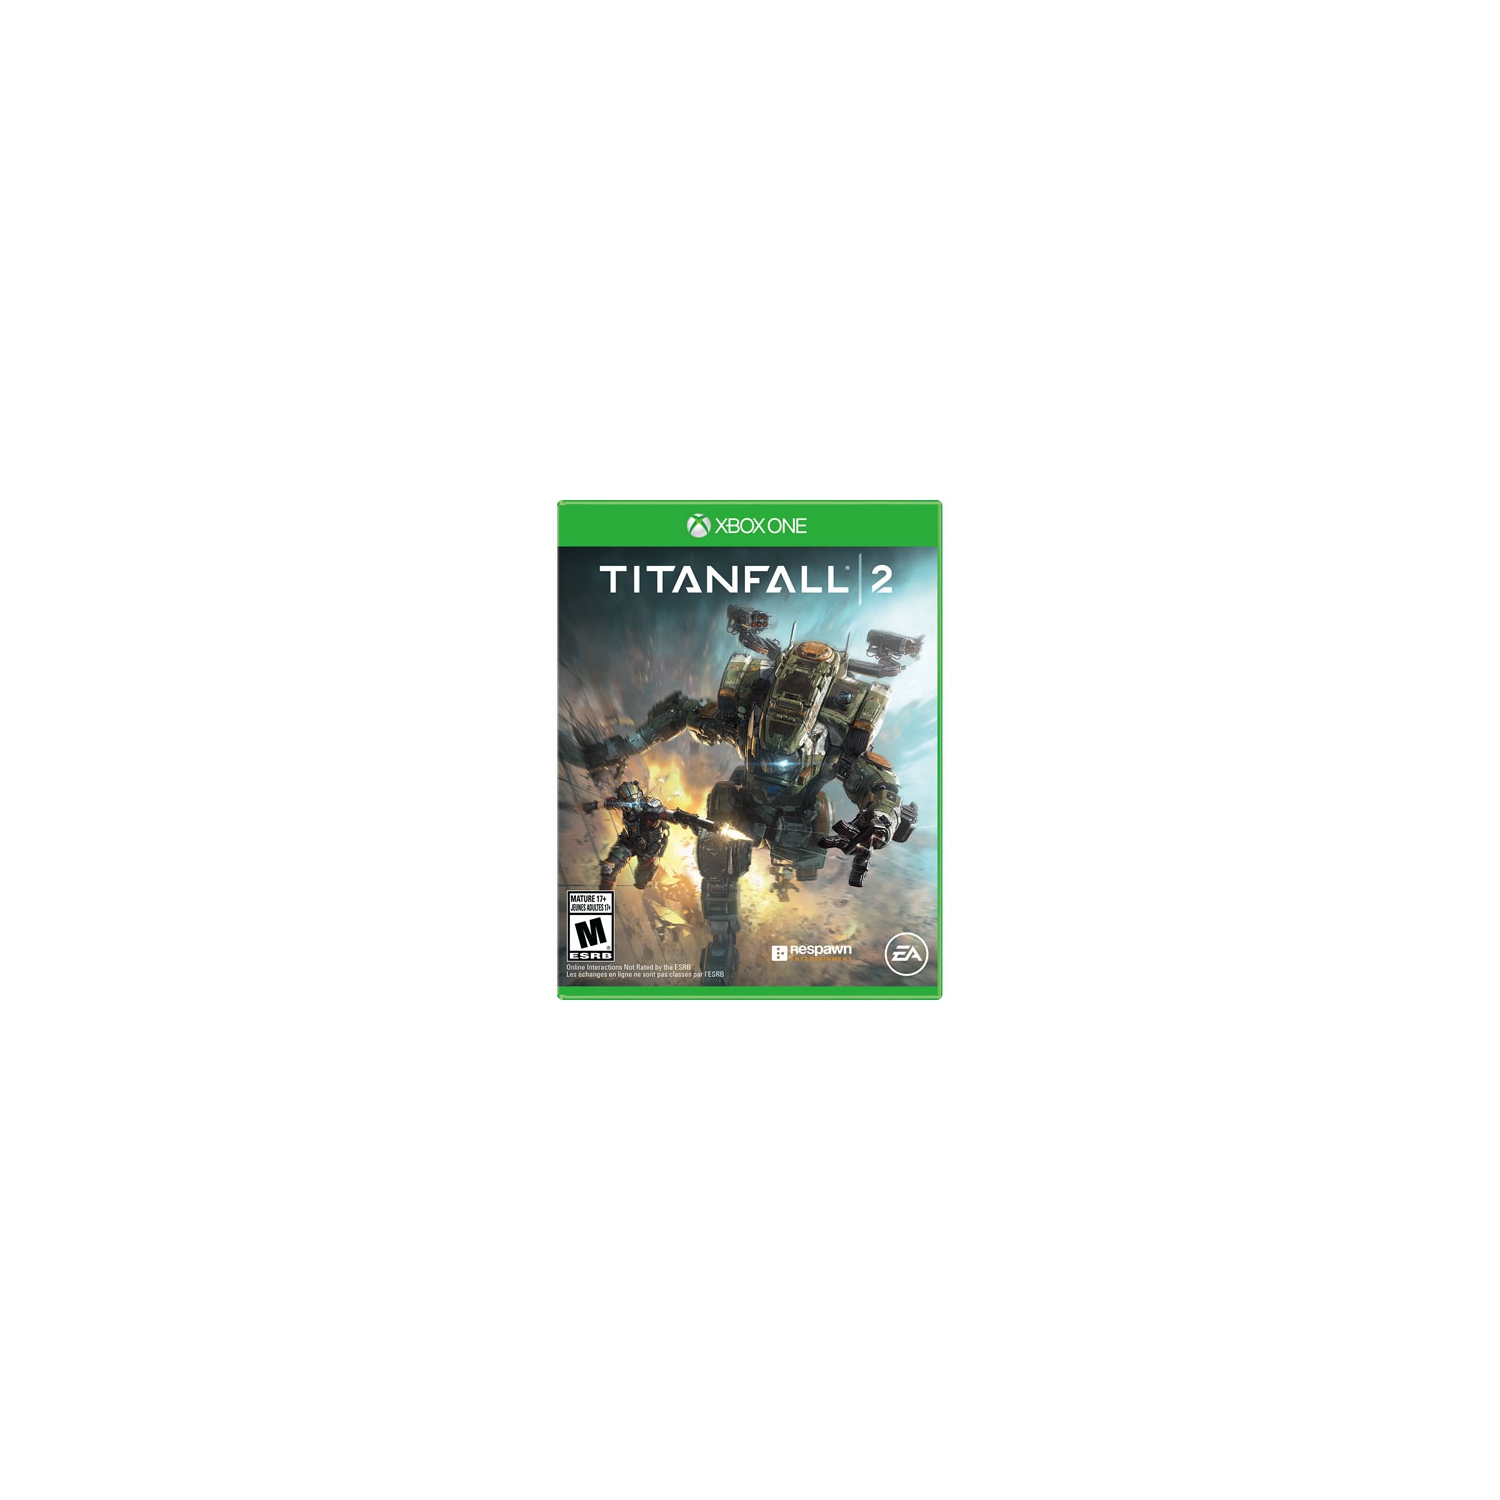 Titan Fall 2 I Xbox One Video Game I Previously Played